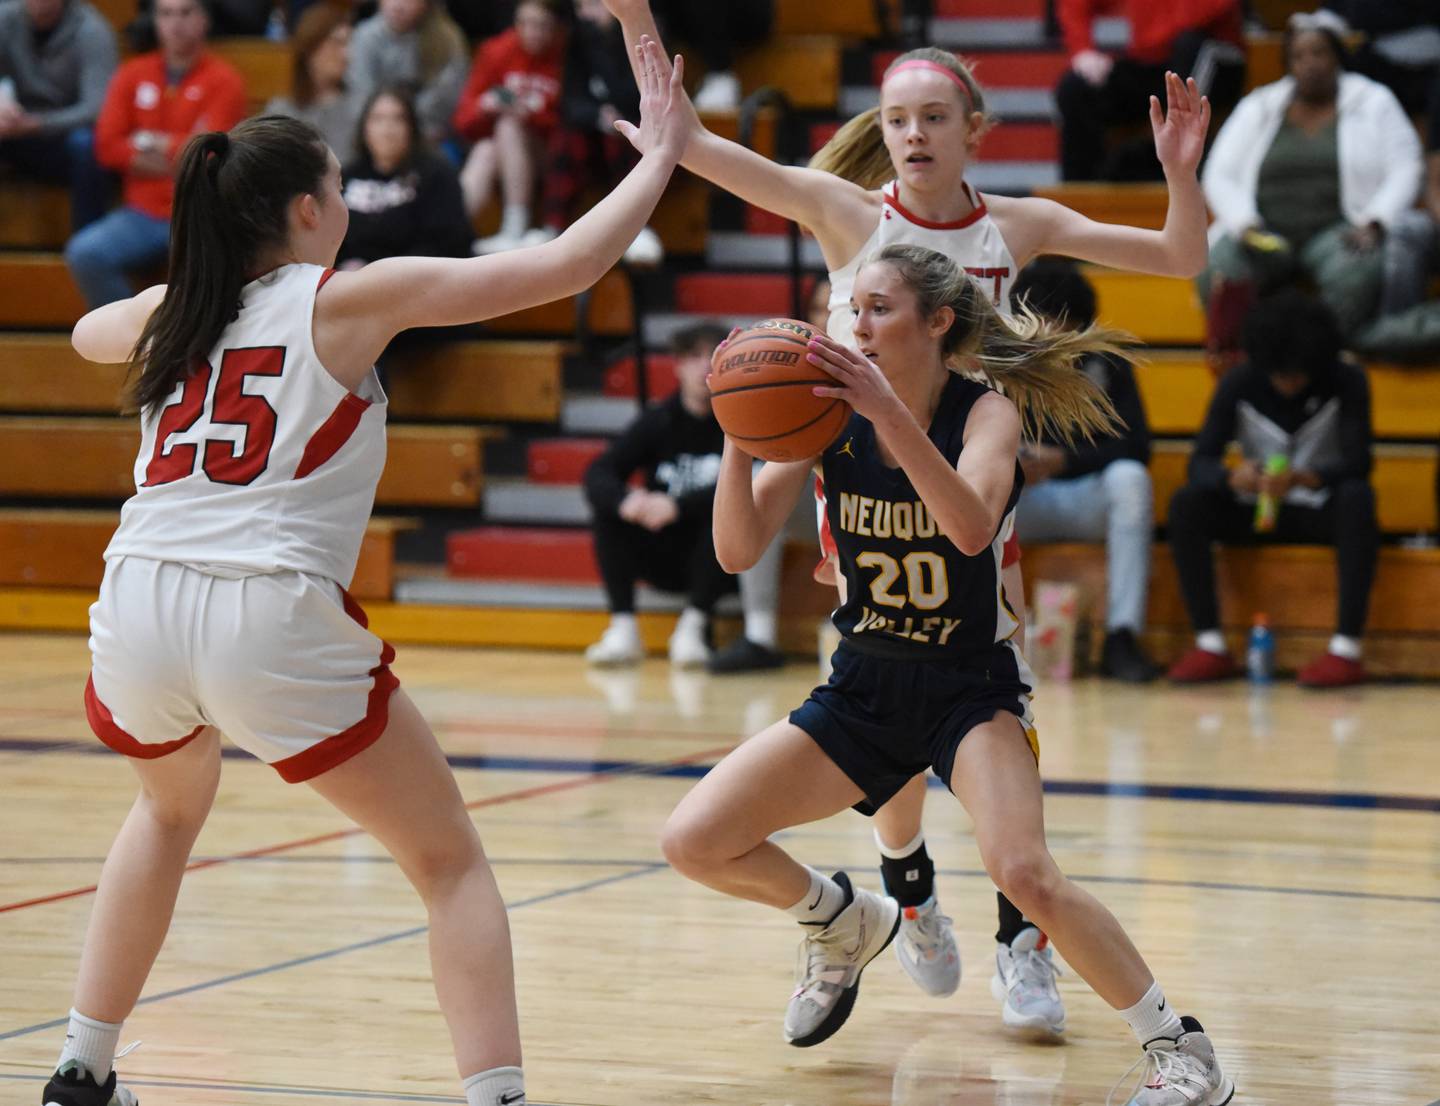 Neuqua Valley's Kylee Norkus (20) looks for room to operate around Benet's Samantha Trimmberger (25) and Bridget Rifenburg during Tuesday’s IHSA Class 4A regional semifinal girls basketball game in Aurora.